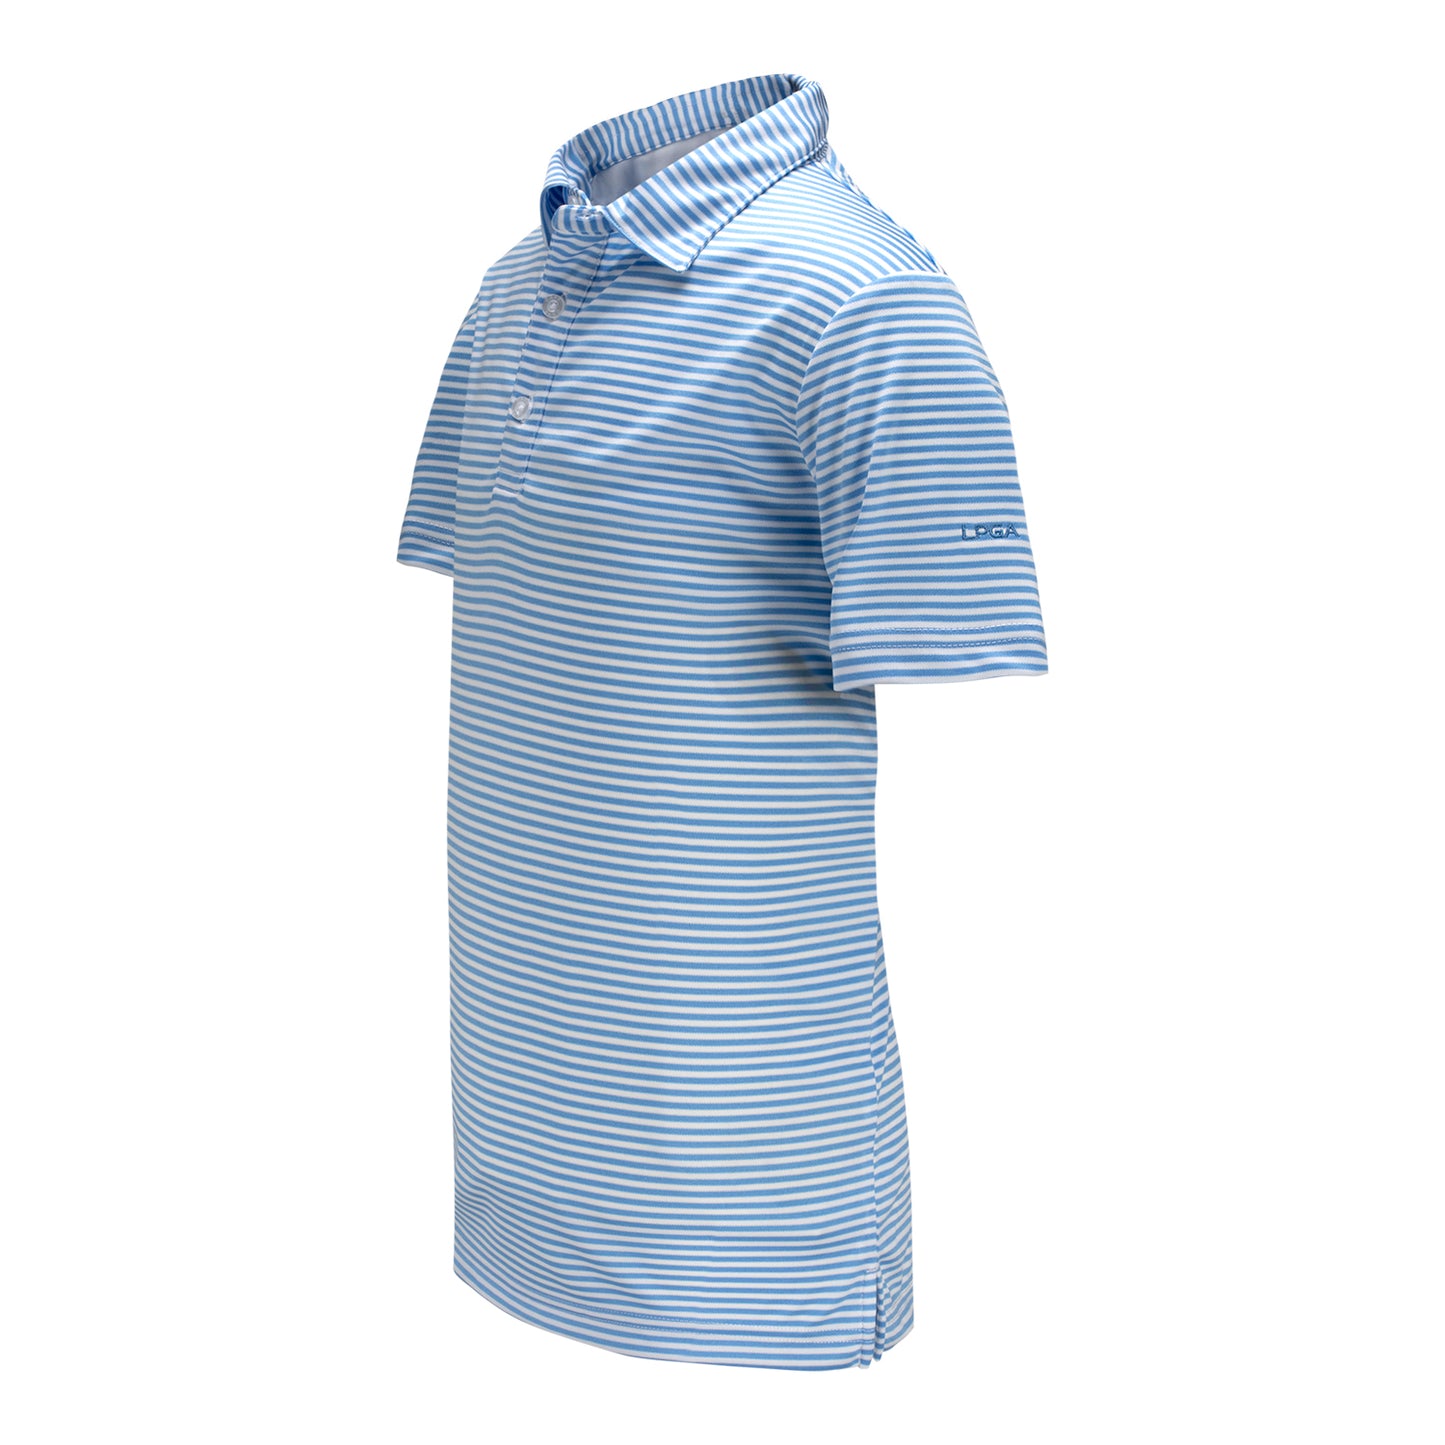 Garb LPGA Carson Boys Youth Polo in Blue - Angled Left Side View